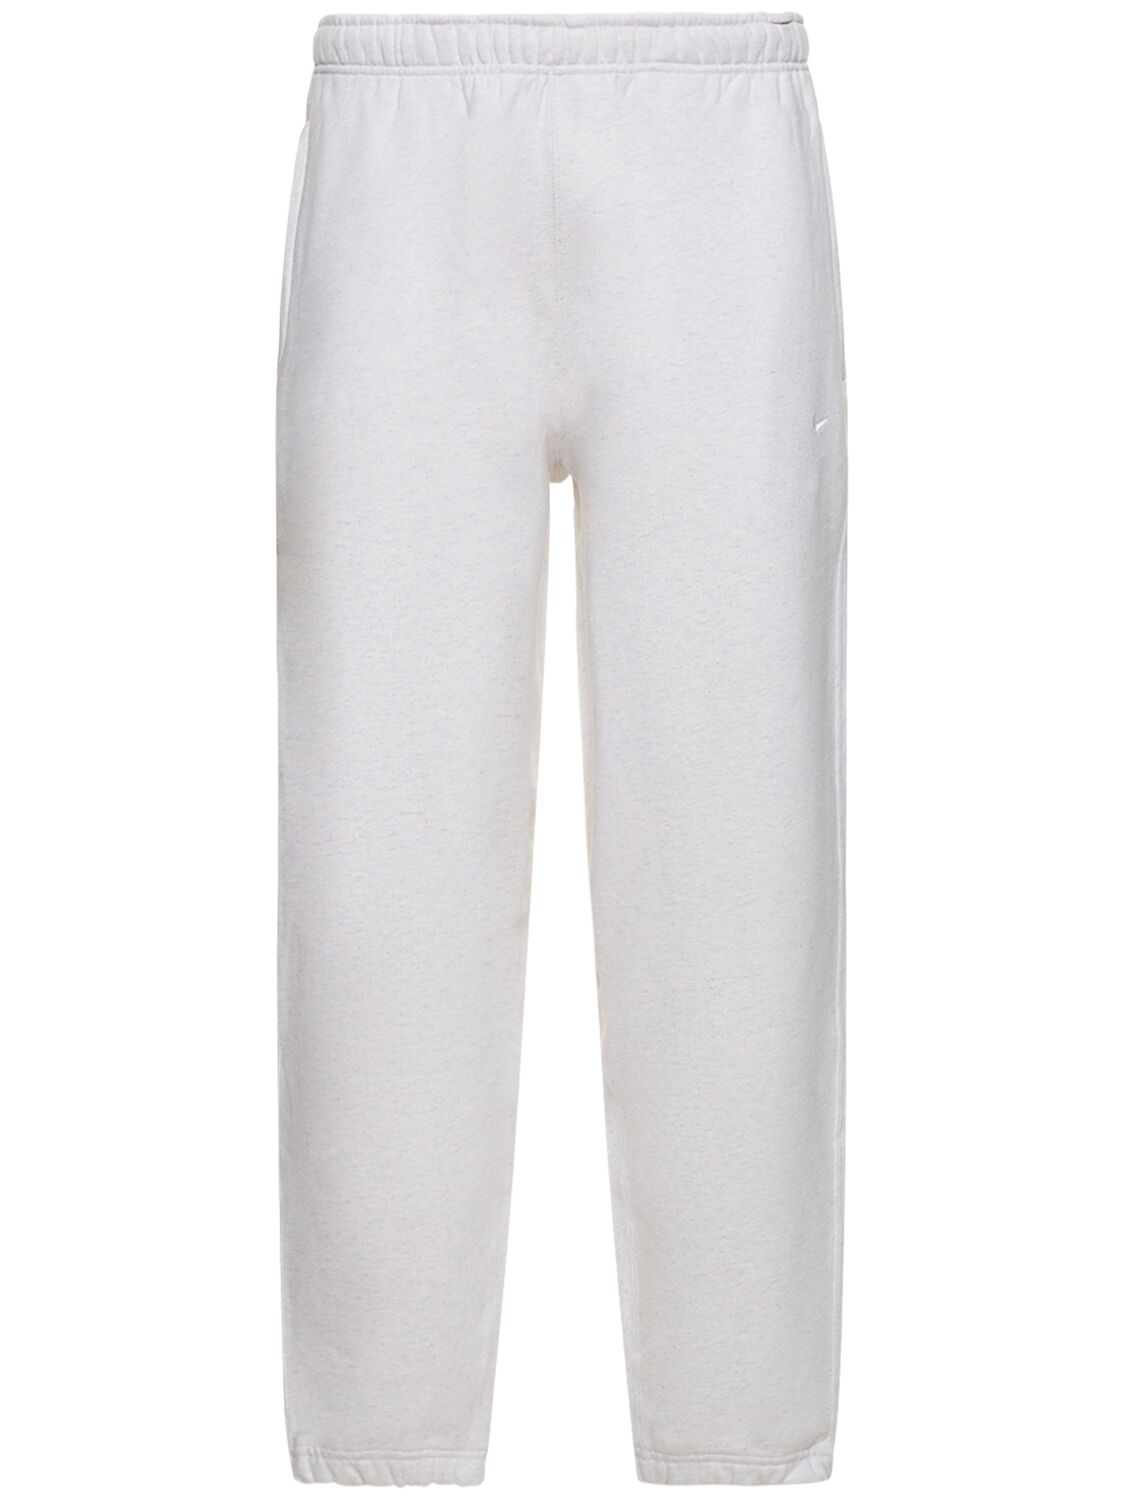 NIKE SOLO SWOOSH COTTON BLEND trousers